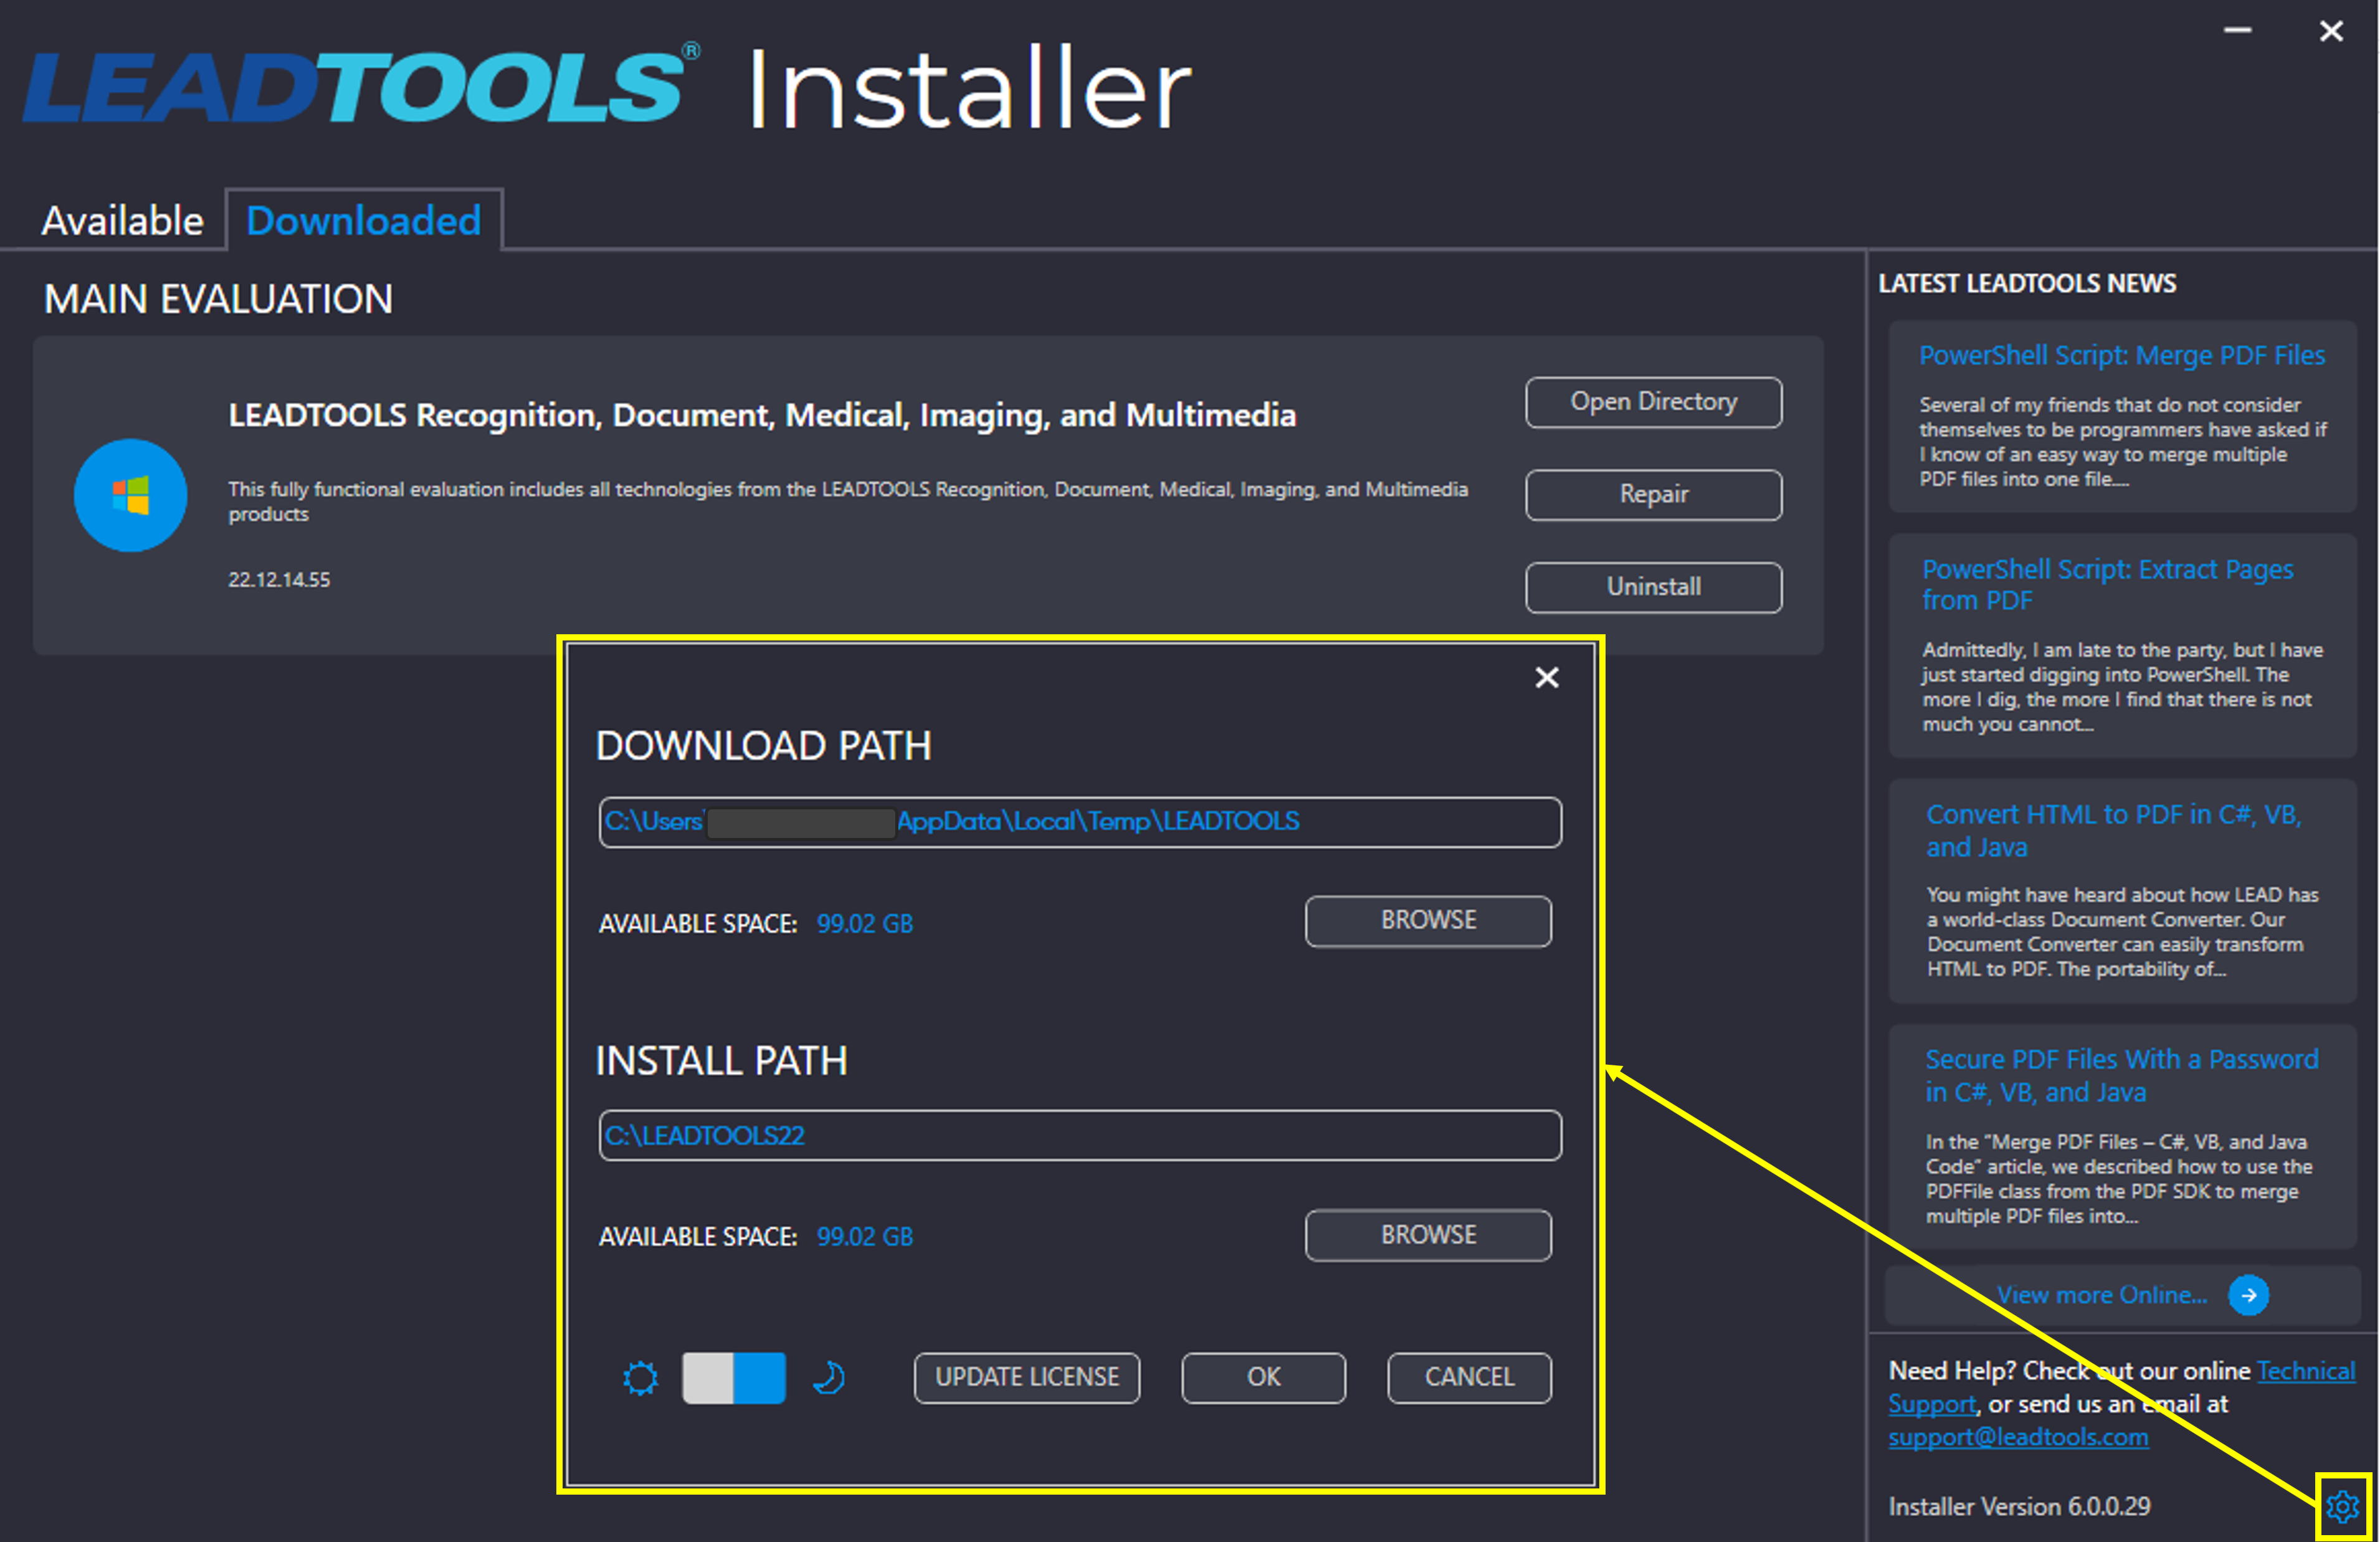 LEADTOOLS Installer Preference Settings